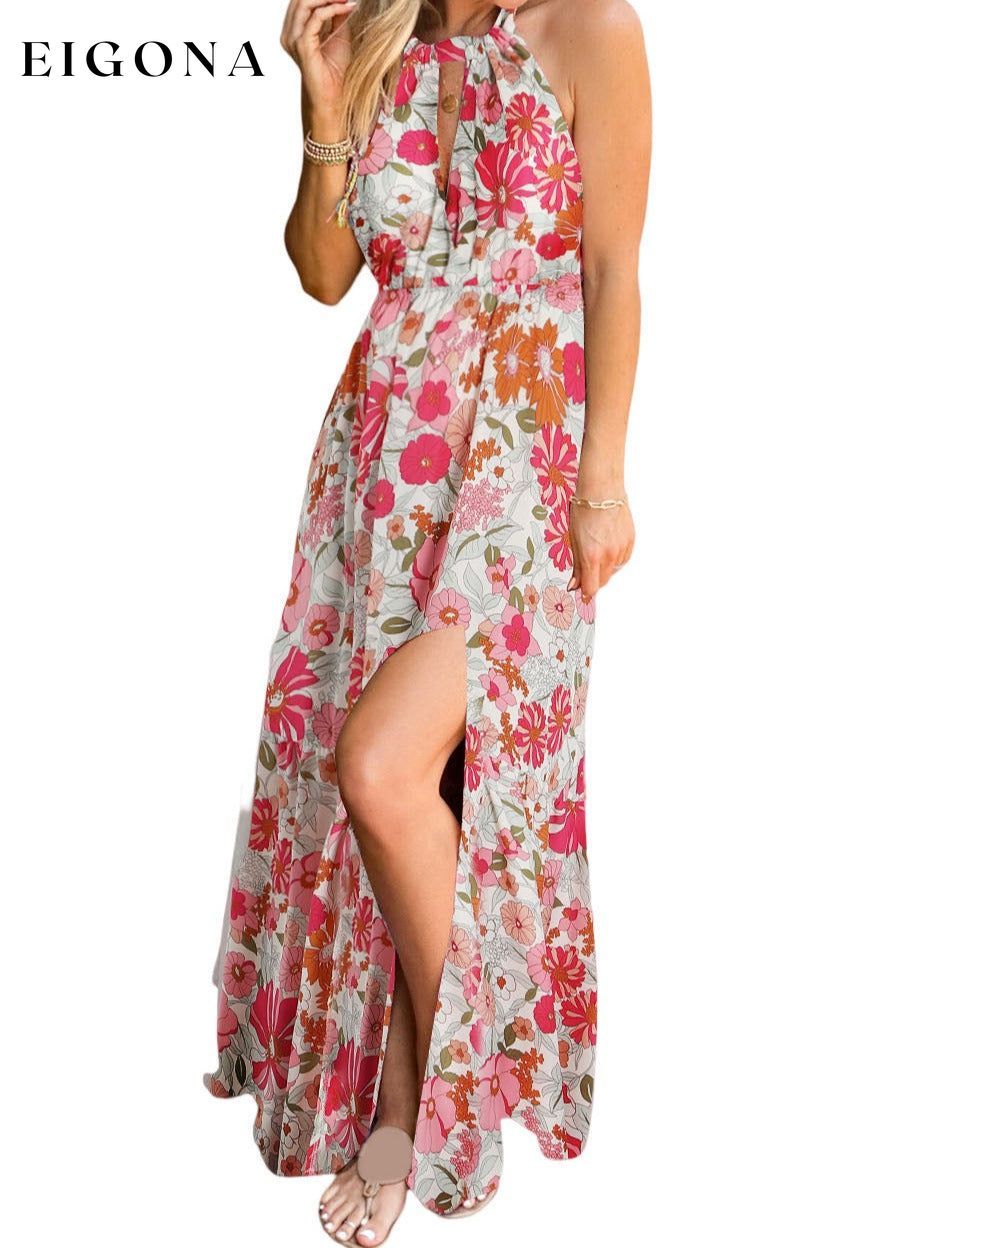 Pink Lace-up Halter Backless High Waist Floral Maxi Dress clothes clothing Day Valentine's Day dress dresses floral dress formal dress formal dresses halter dress long dress long sleeve dress maxi dress maxi dresses Occasion Daily Print Floral Season Summer Silhouette A-Line slit dress Style Southern Belle